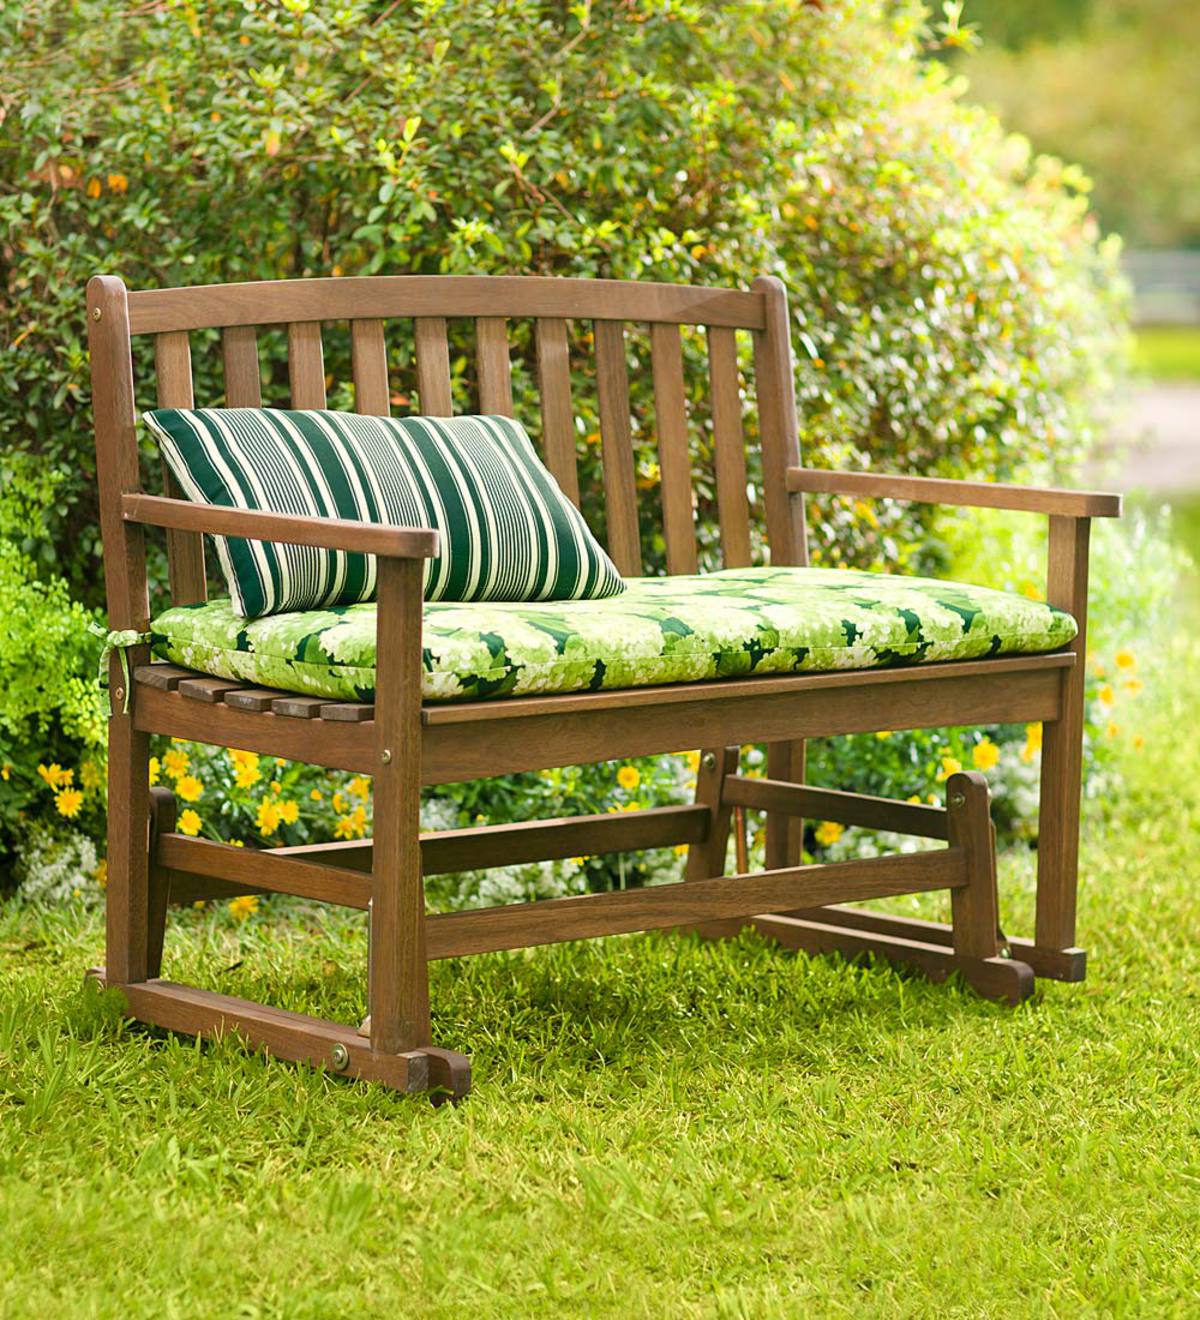 Plow & Hearth Eucalyptus Wood Love Seat Glider, Lancaster Outdoor Furniture Collection - Natural - image 2 of 2